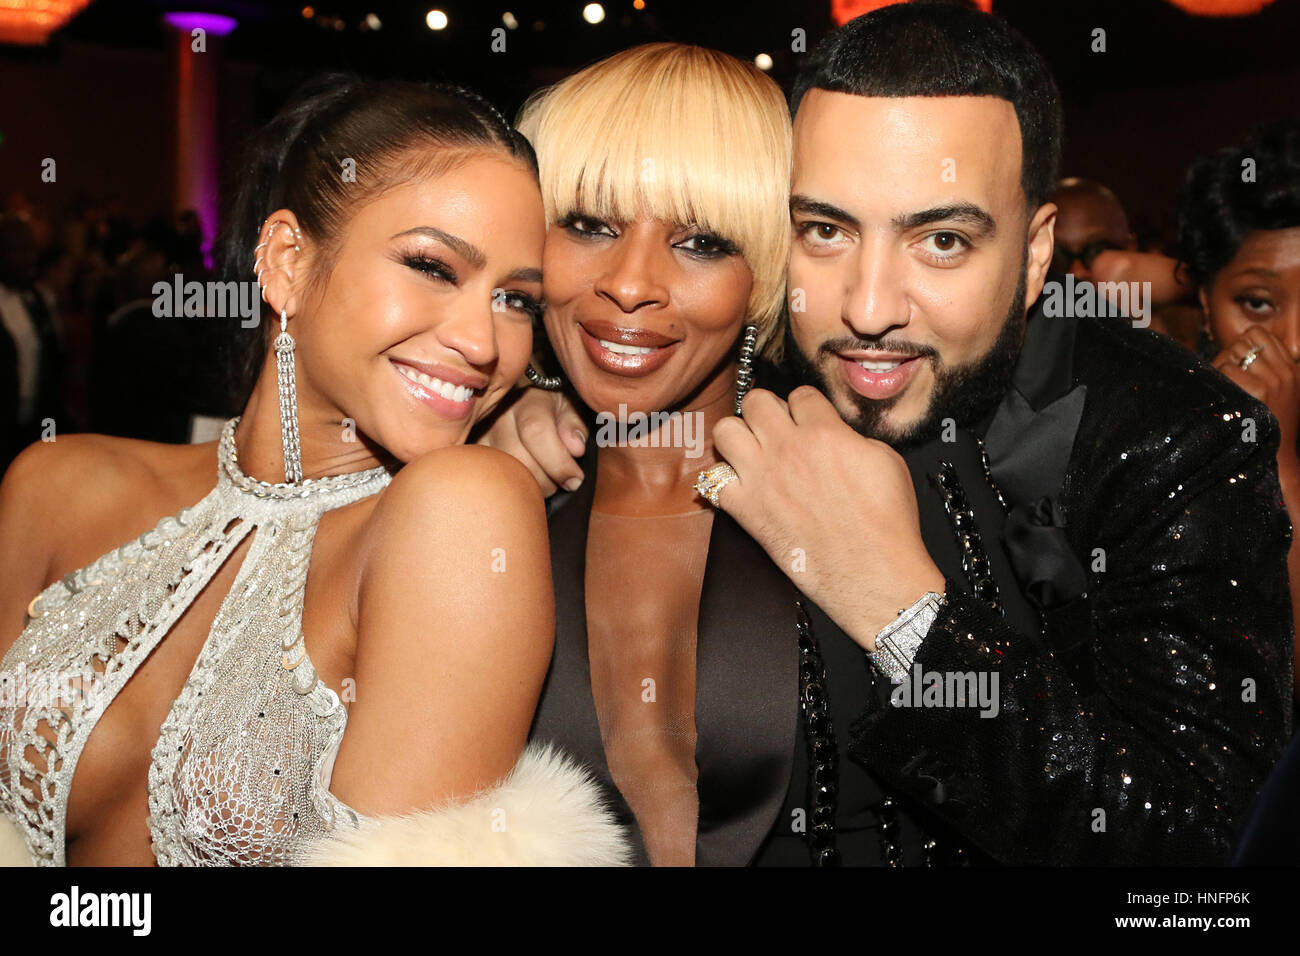 Los Angeles, Ca, USA. 11th Feb, 2017. Cassie, Mary J. Blige and French Montana inside at the Pre-GRAMMY Gala and Salute to Industry Icons Honoring Debra Lee at The Beverly Hilton on February 11, 2017 in Los Angeles, California. Stock Photo